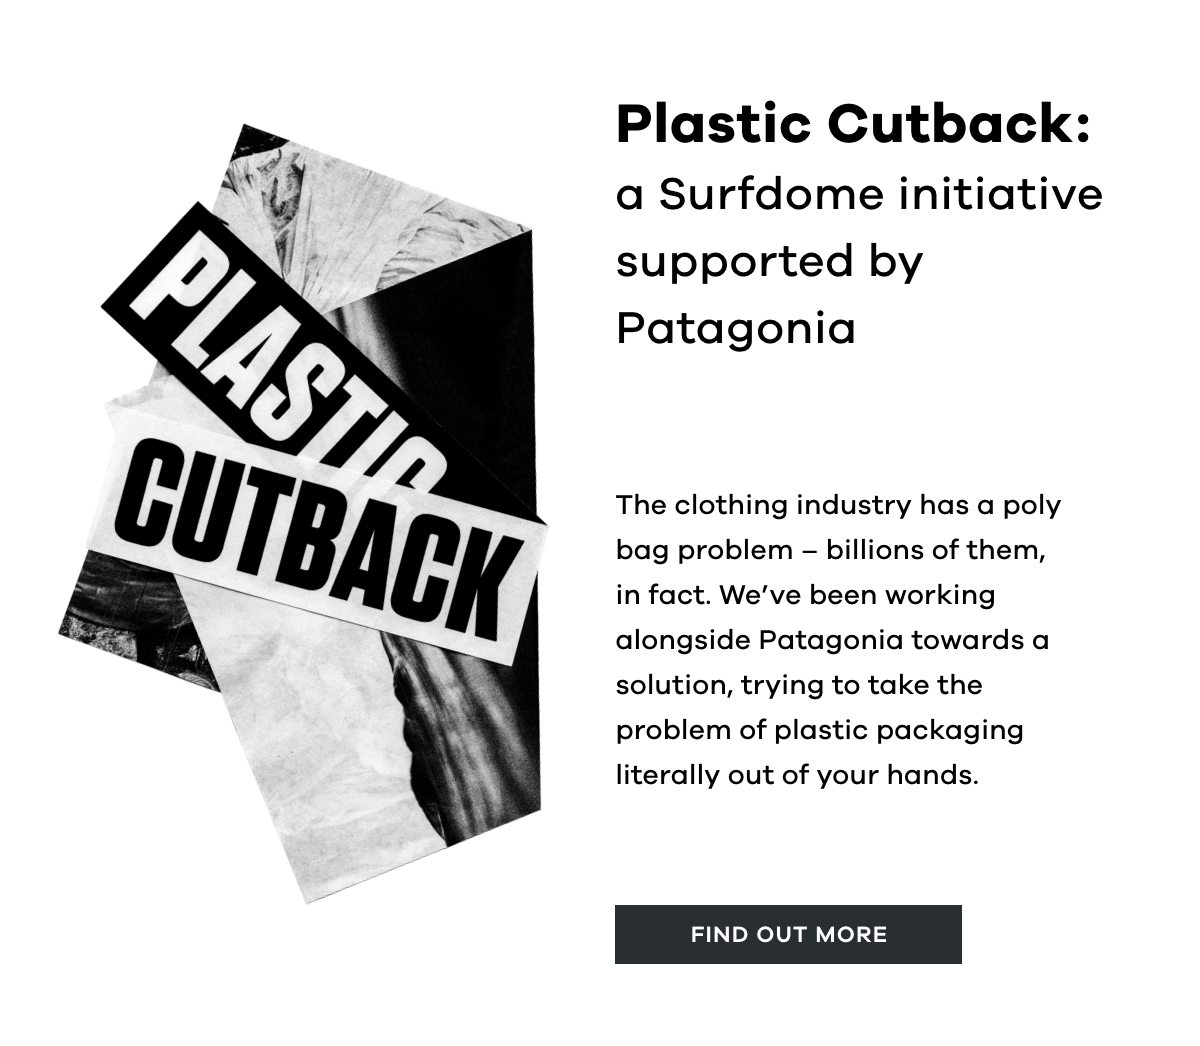 Plastic Cutback | Find out more